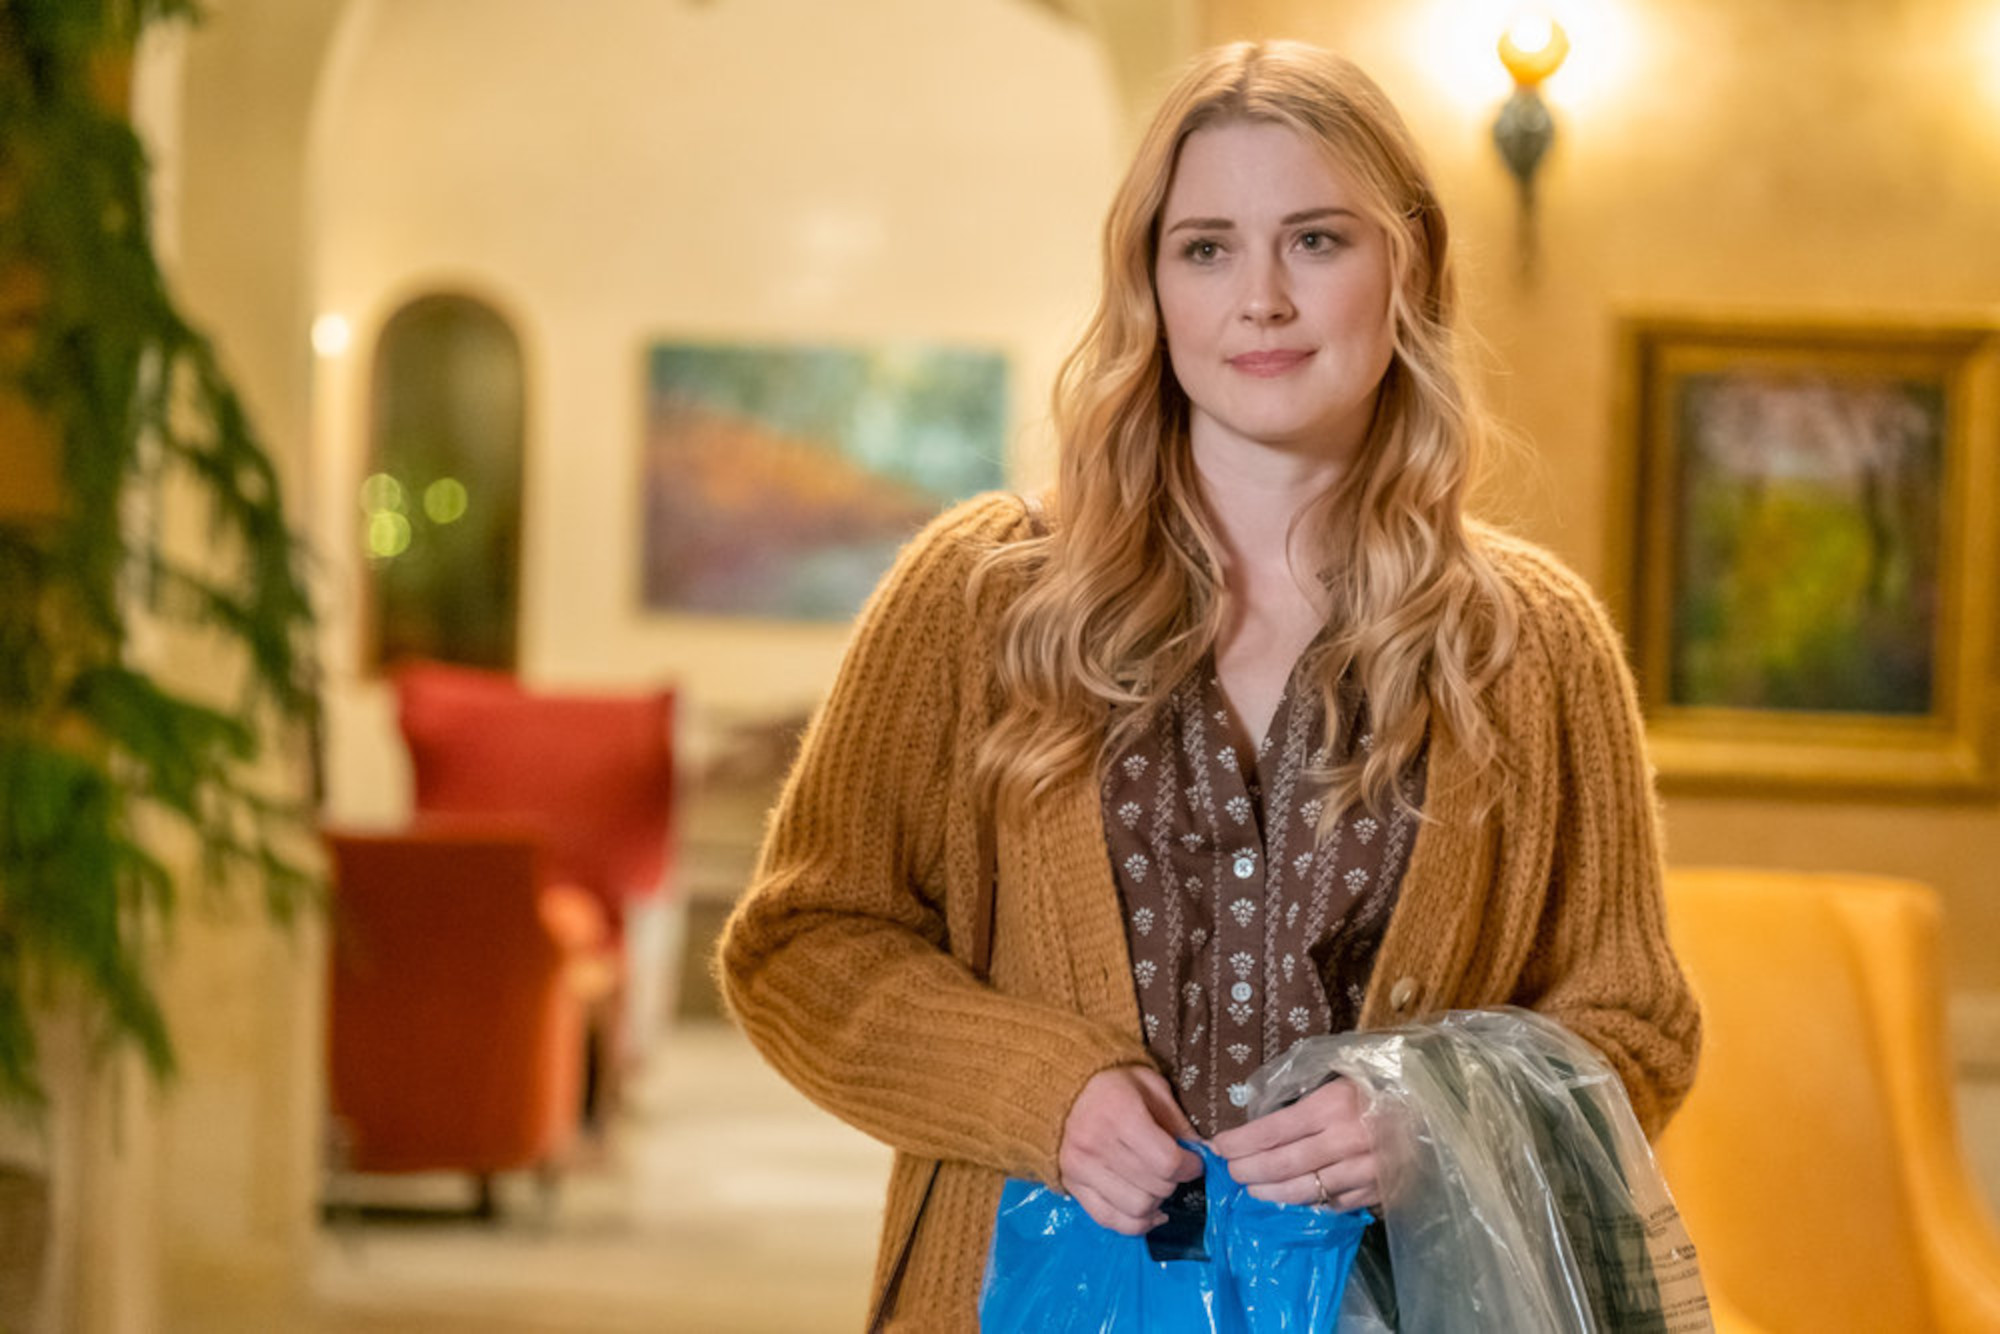 Alexandra Breckenridge as Sophie Inman in 'This Is Us' Season 6 Episode 14. She's wearing a yellow sweater, holding a blue bag, and smiling.